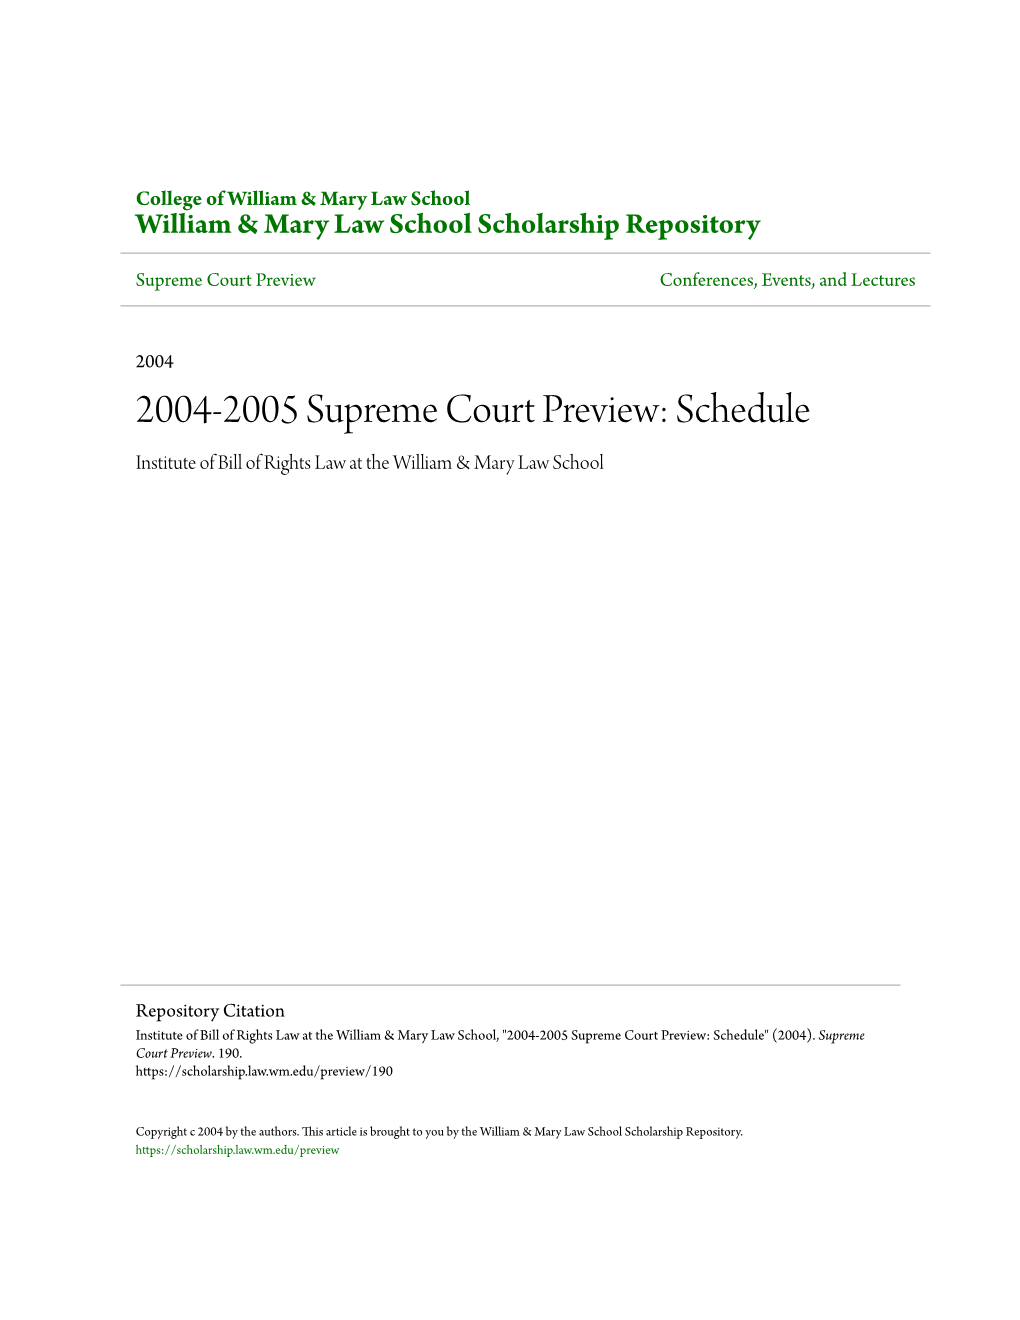 2004-2005 Supreme Court Preview: Schedule Institute of Bill of Rights Law at the William & Mary Law School